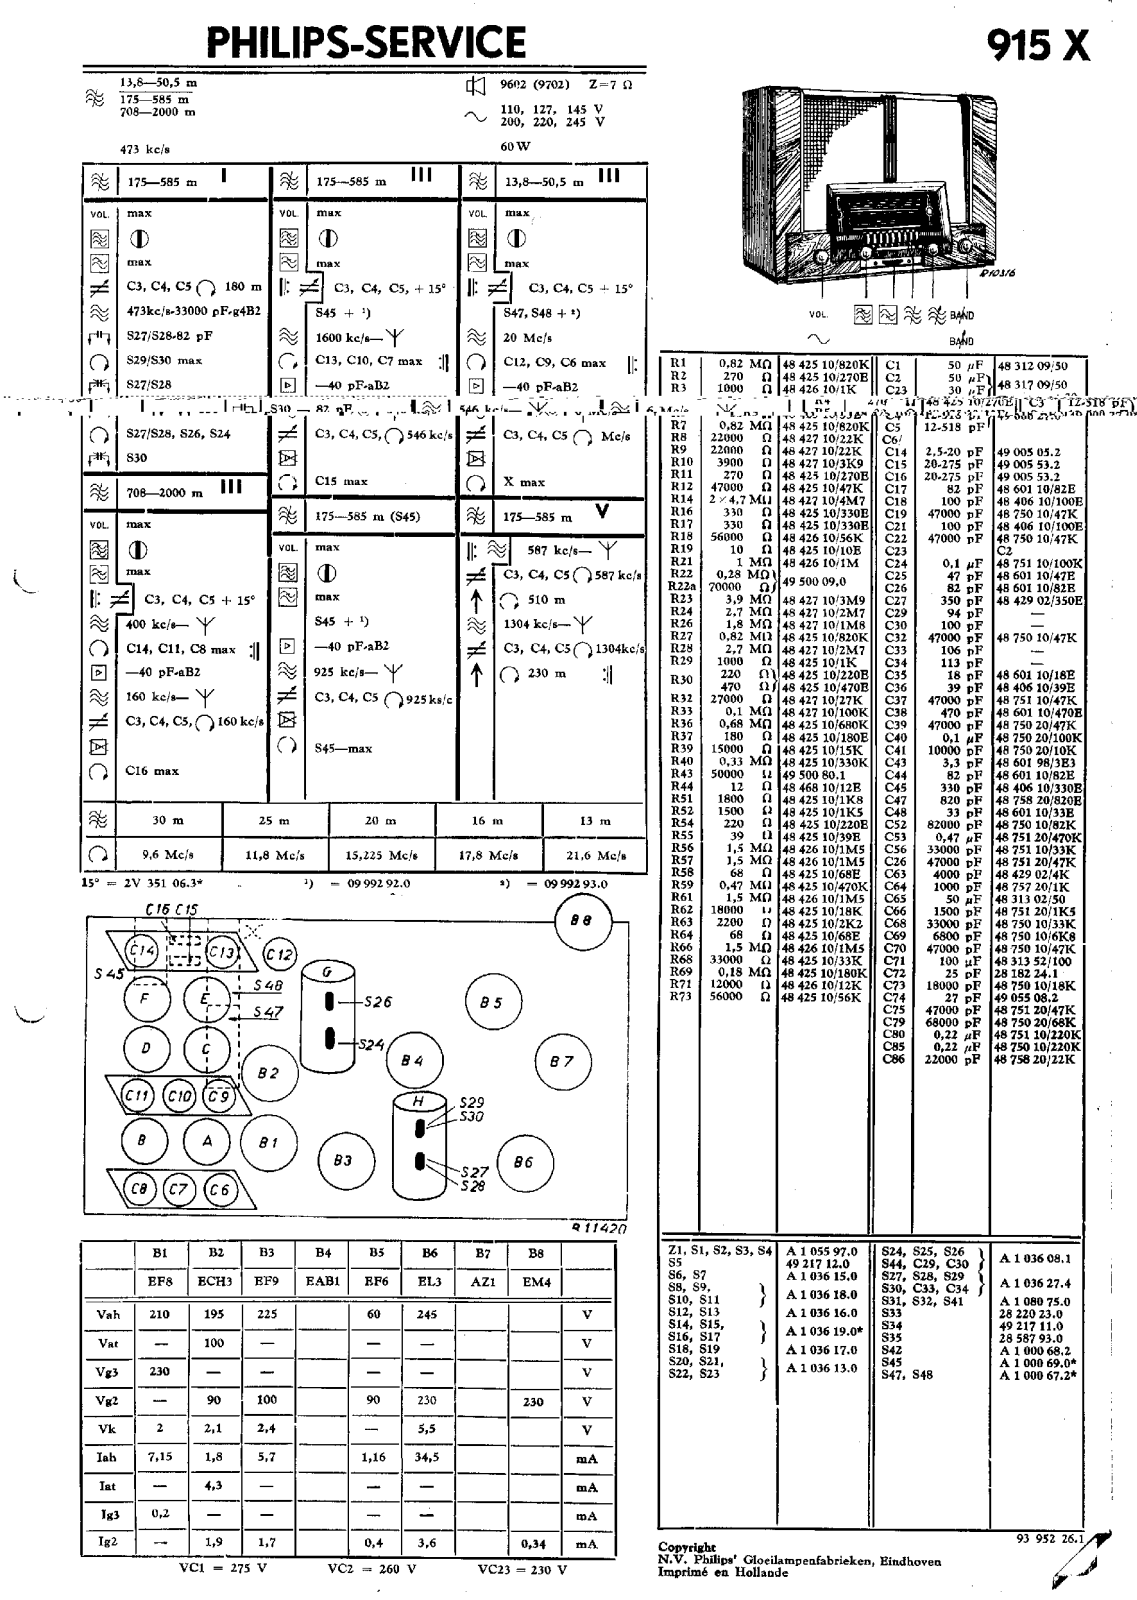 Philips 915-X Service Manual